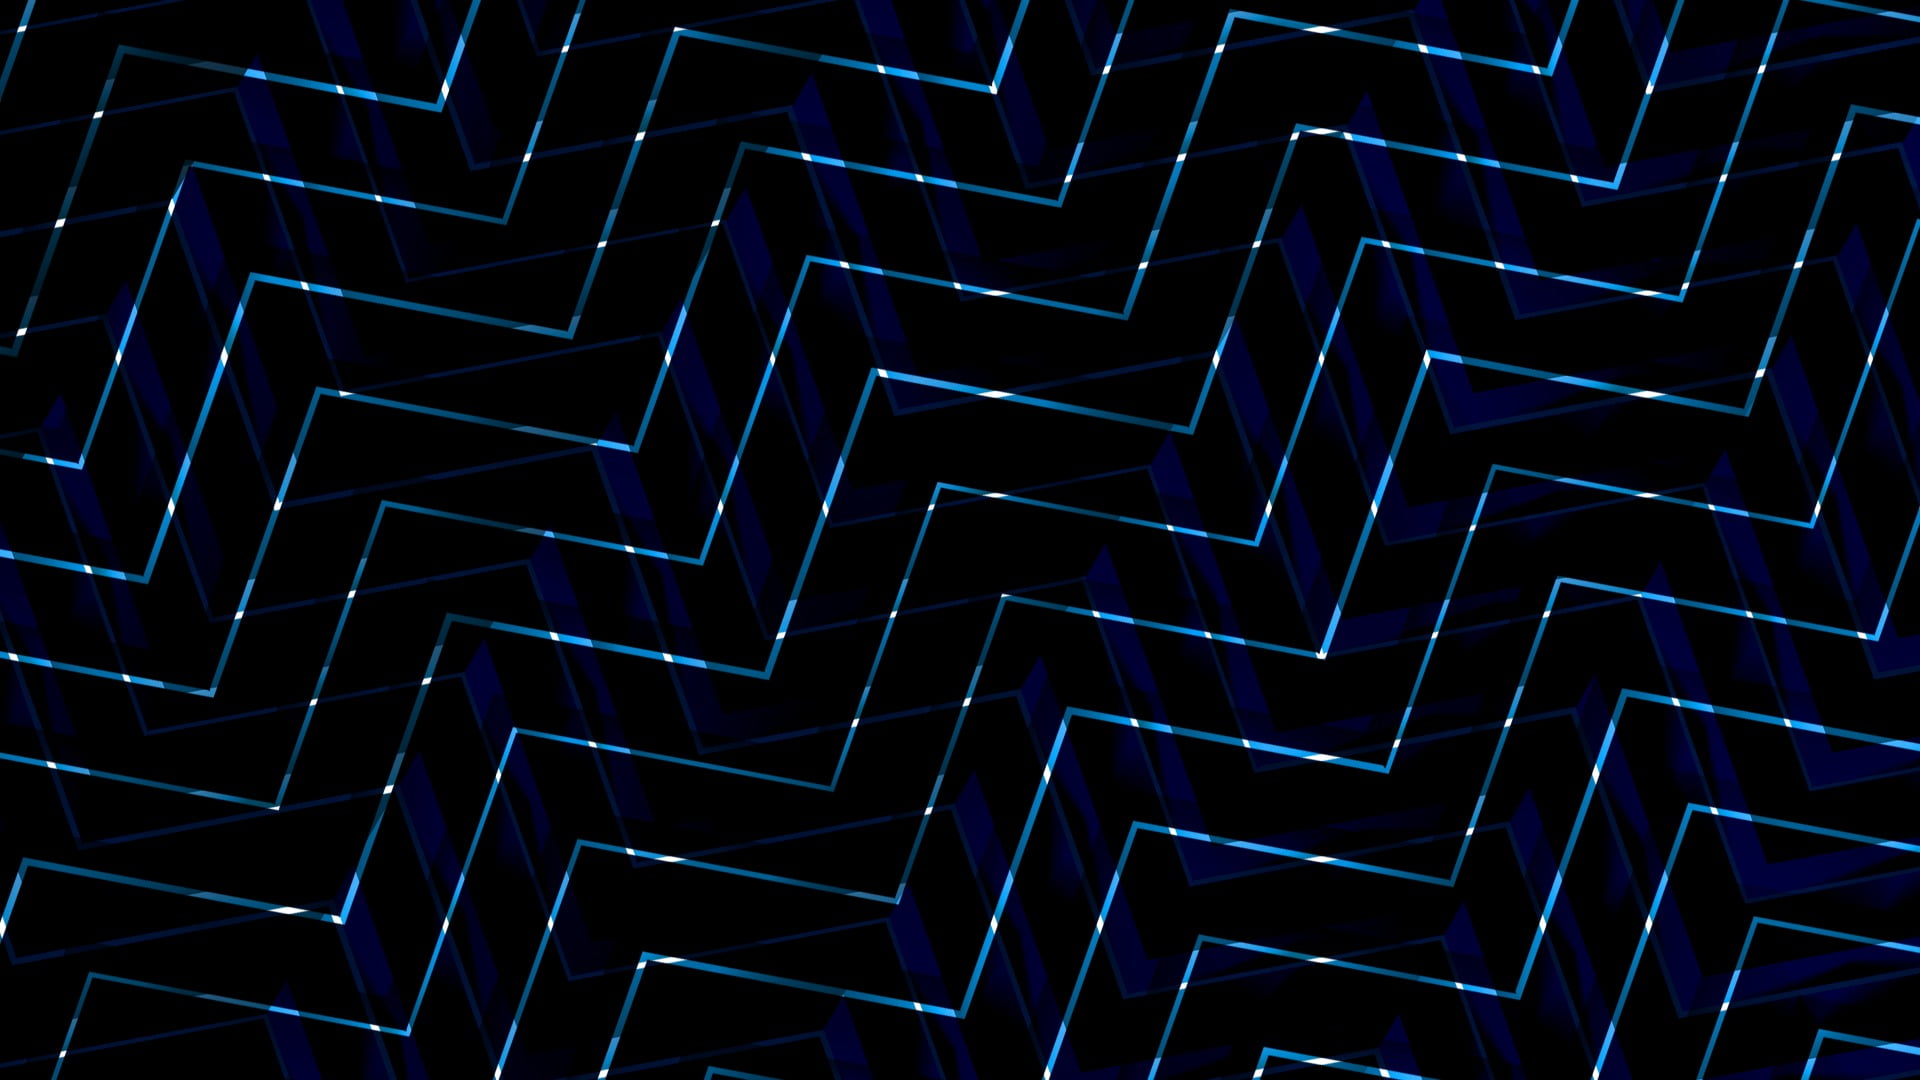 untitled, lines, pattern, square, blocky, dark, shiny, backgrounds